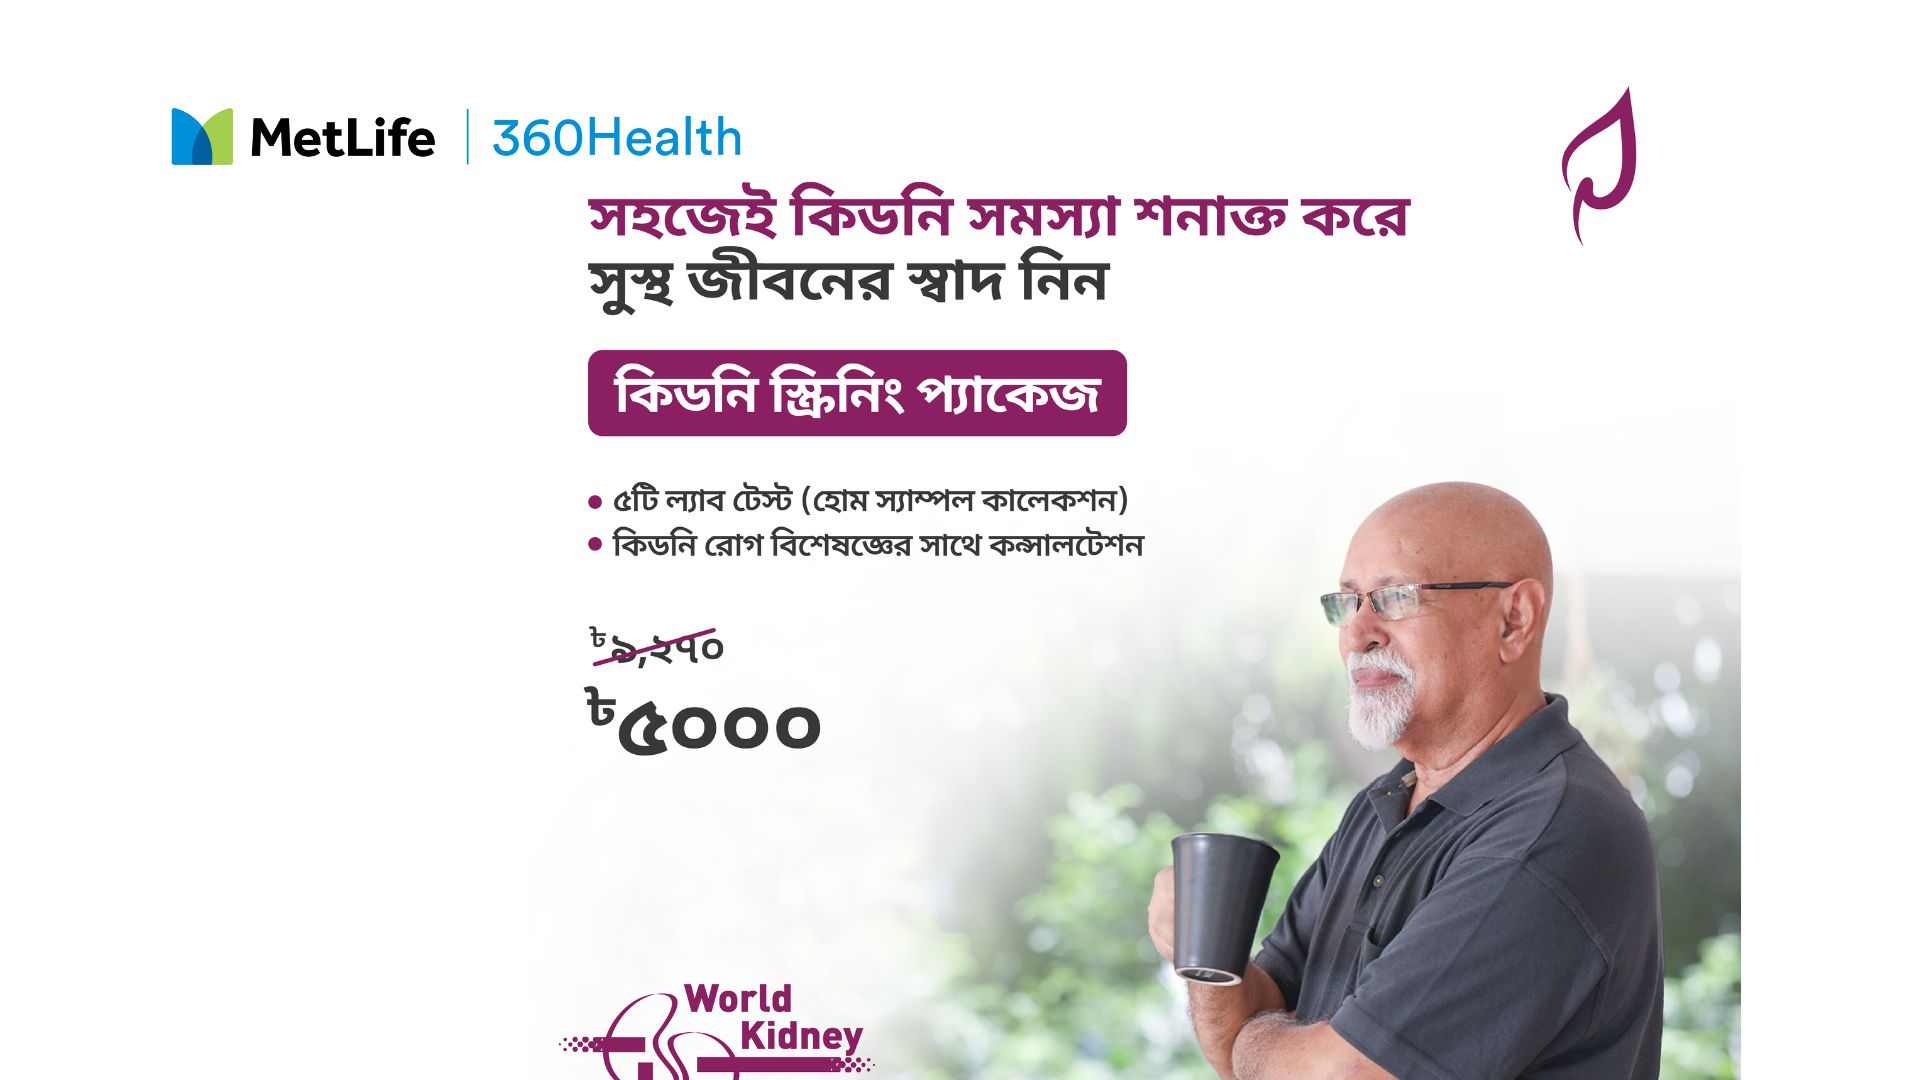 MetLife 360Health Kidney Check-up Package Offer At Praava Health